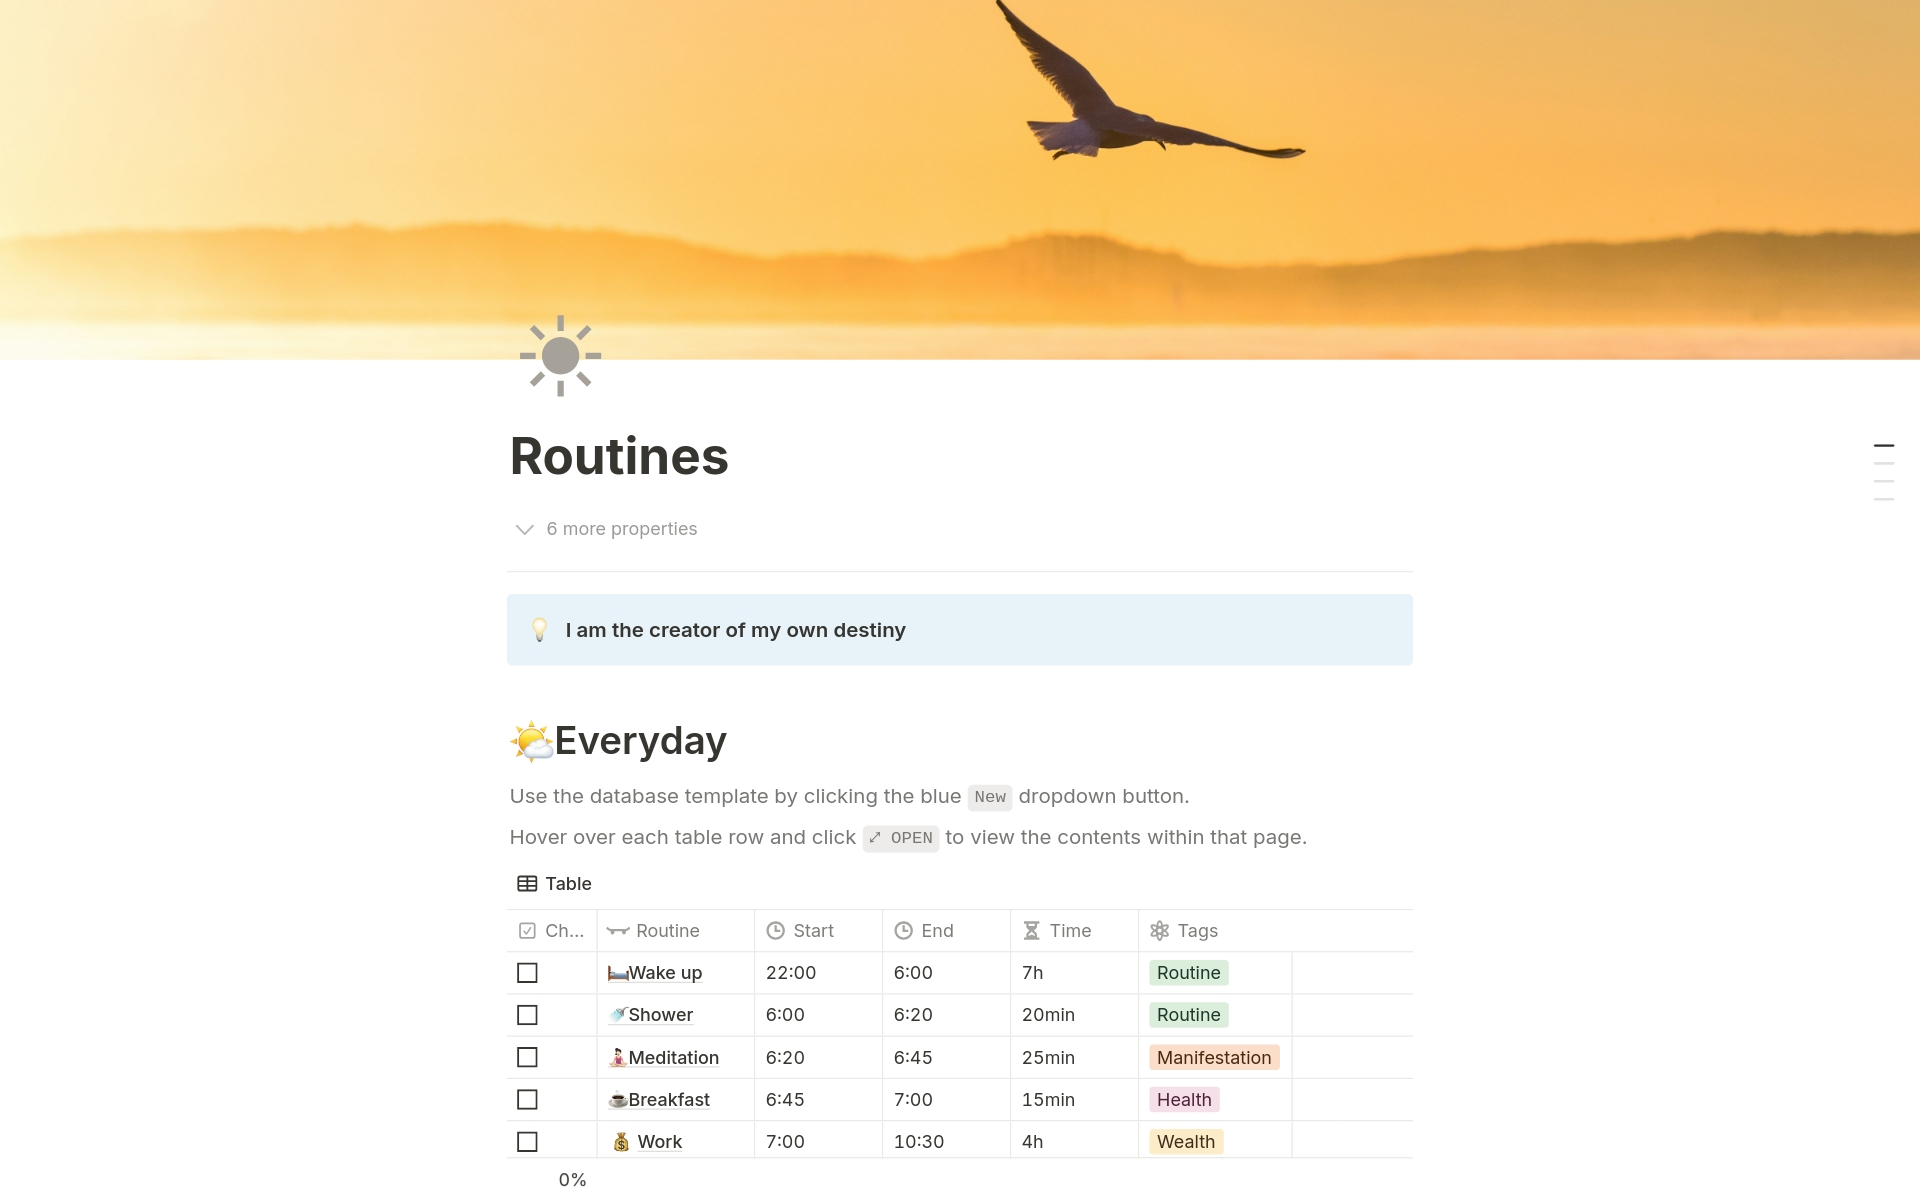 Routines Template Guide: This simple daily planner is designed for people who want to plan their routines.